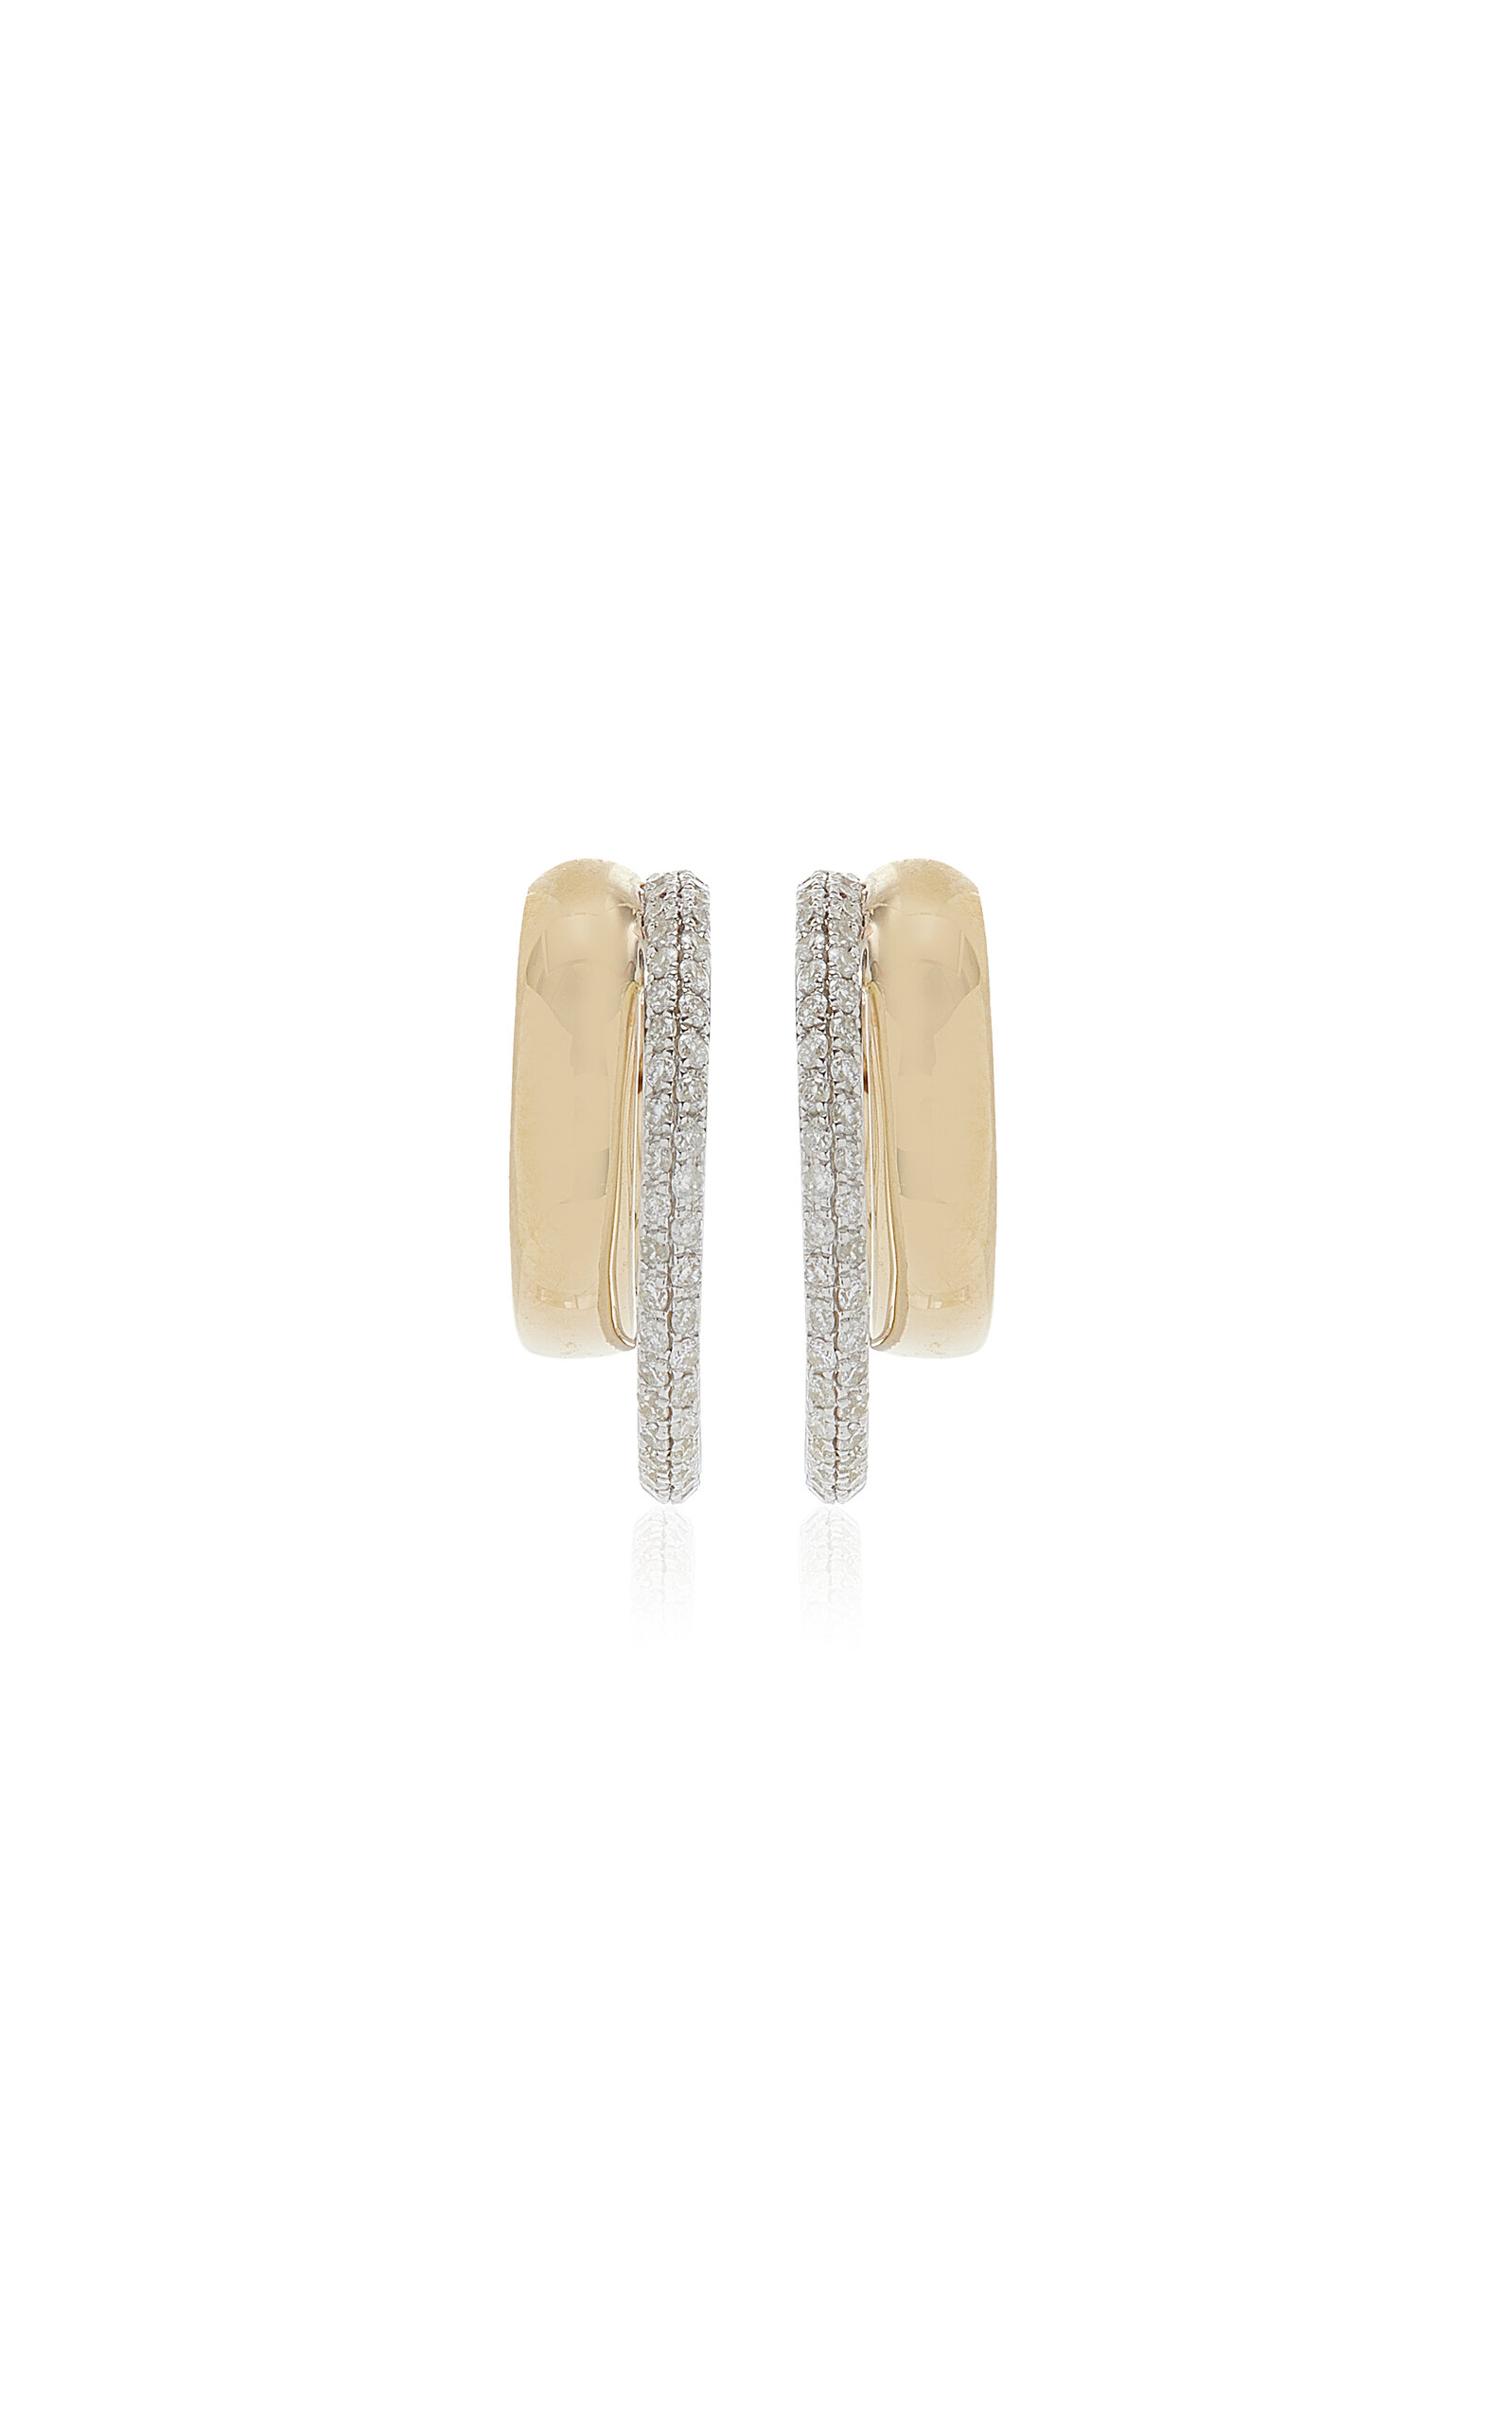 Yvonne Léon Decalees 9k White And Yellow Gold Diamond Hoop Earrings